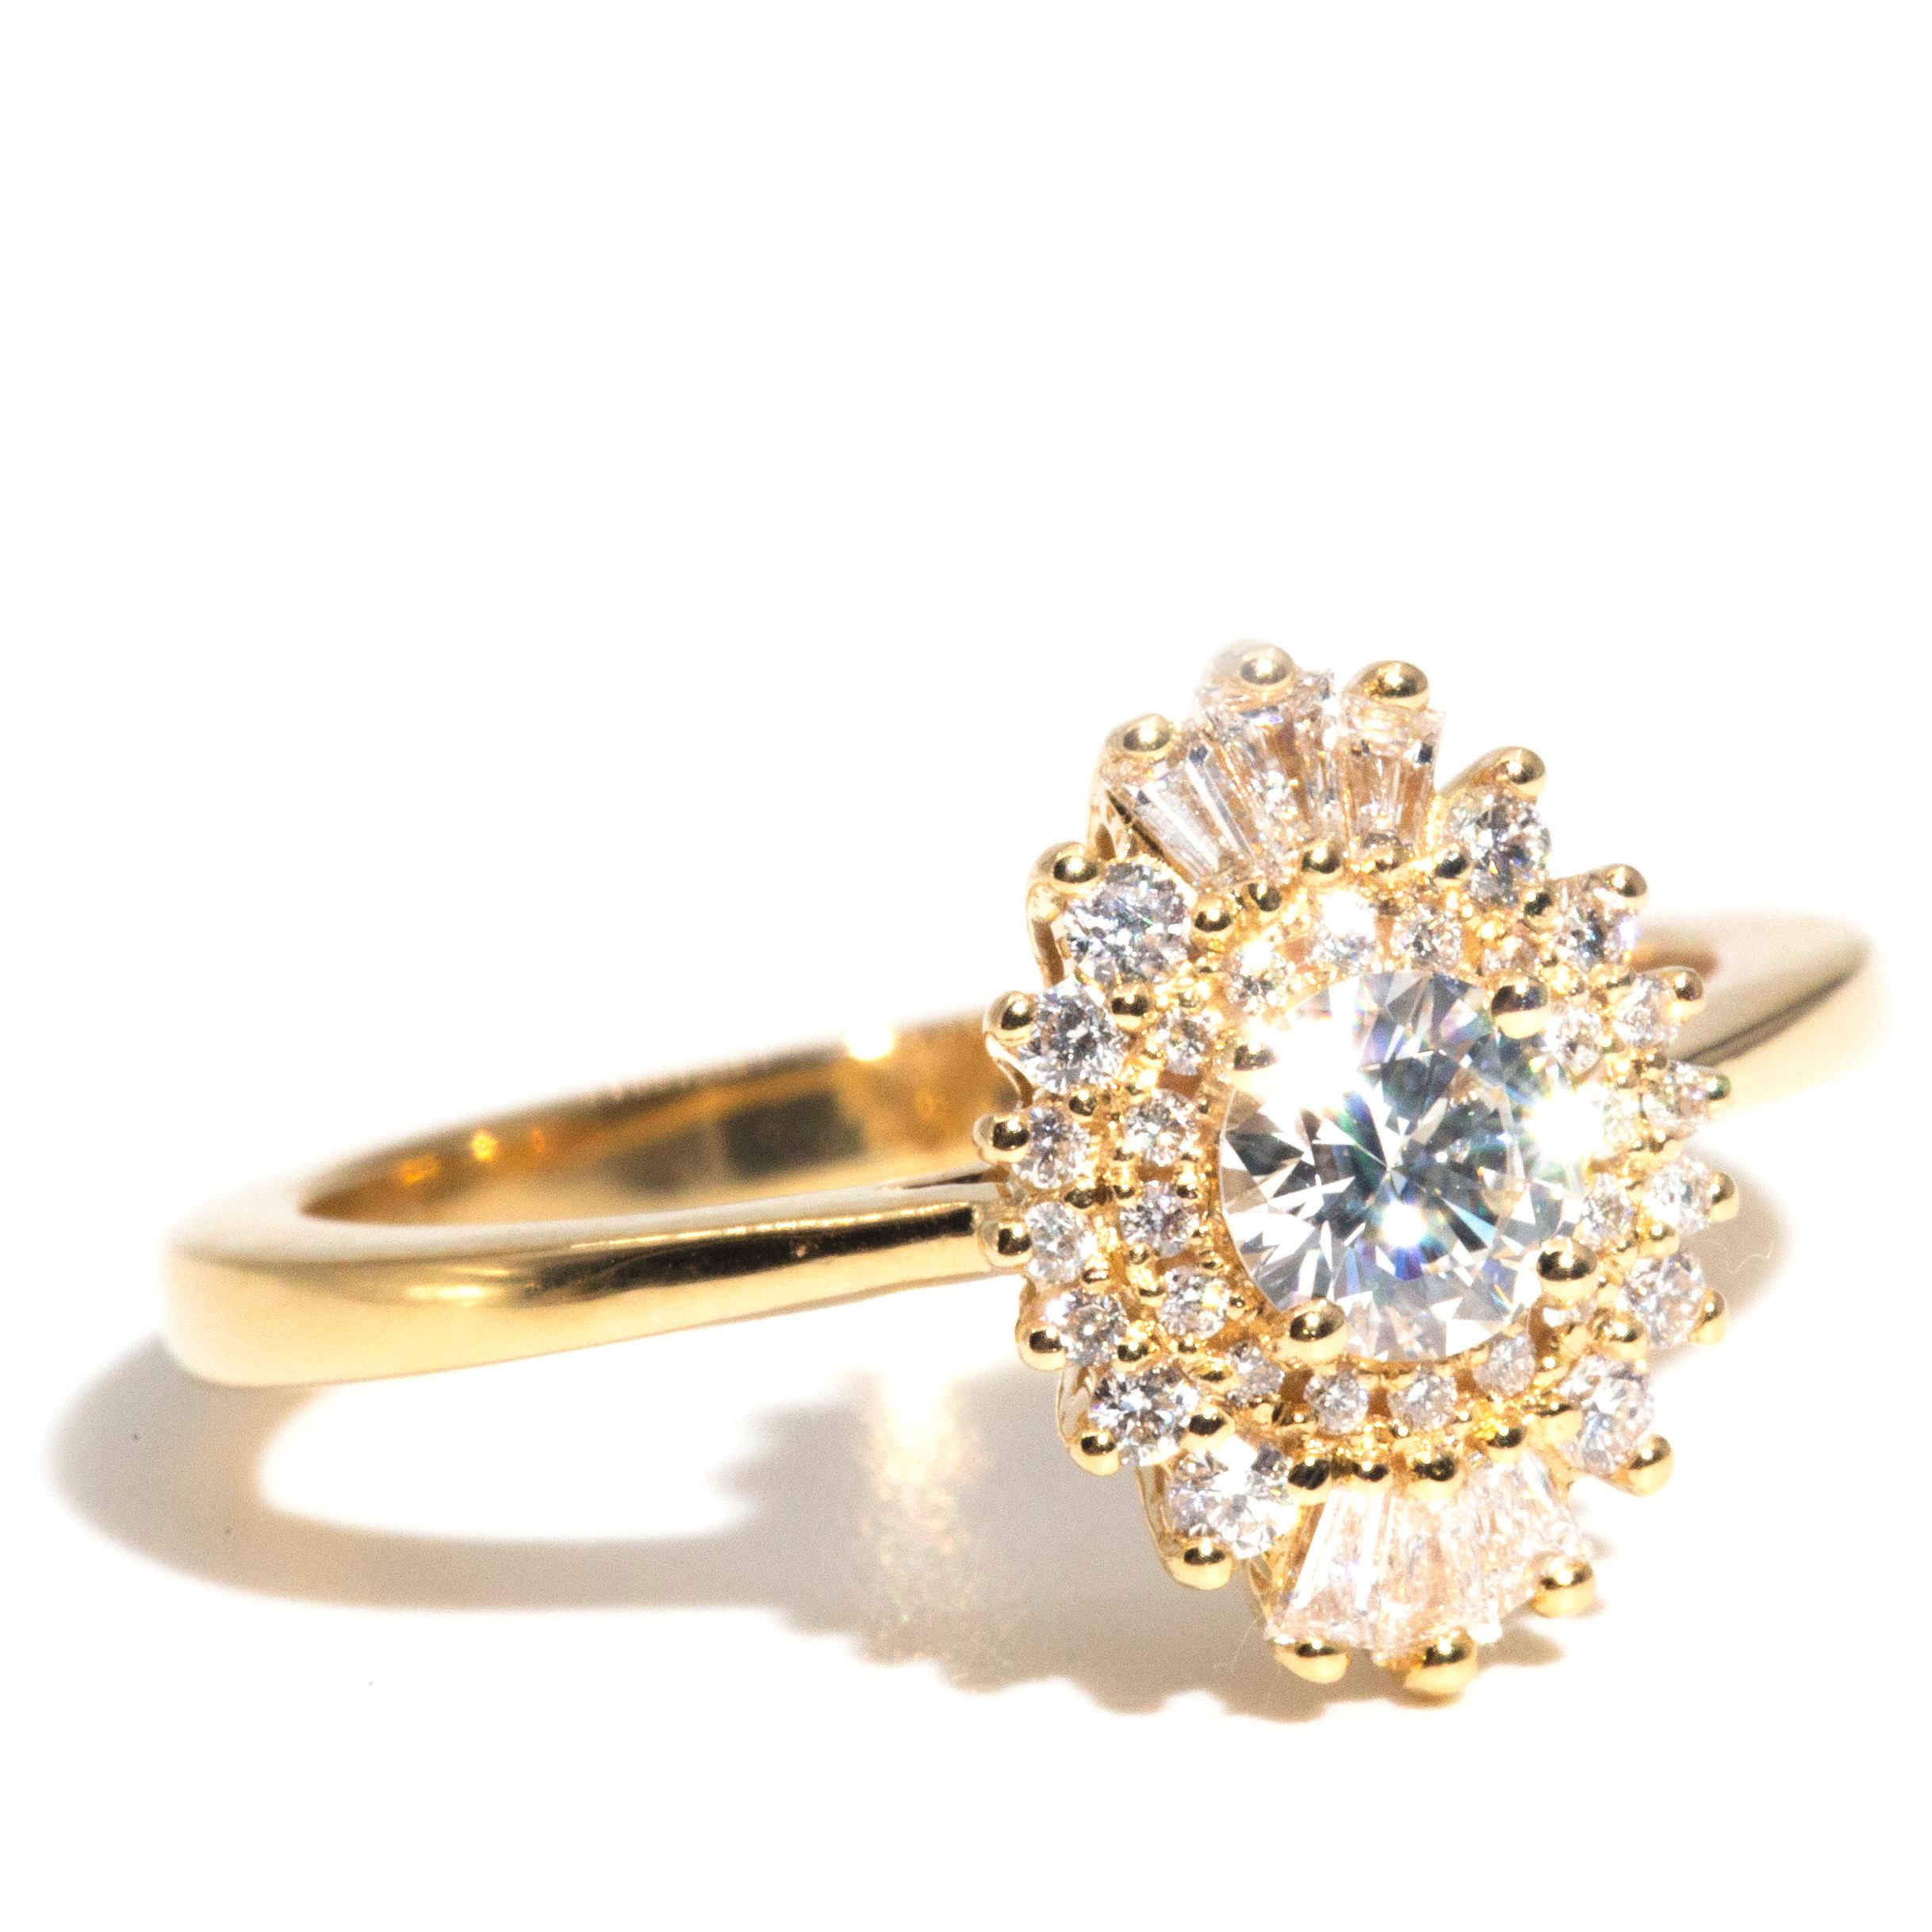 Thoughtfully crafted in 18 carat yellow gold, this breathtaking ring features an enchanting certified 0.30 carat round brilliant diamond shimmering inside a ballerina border of 0.35 carats of gorgeous round brilliant and tapered baguette cut